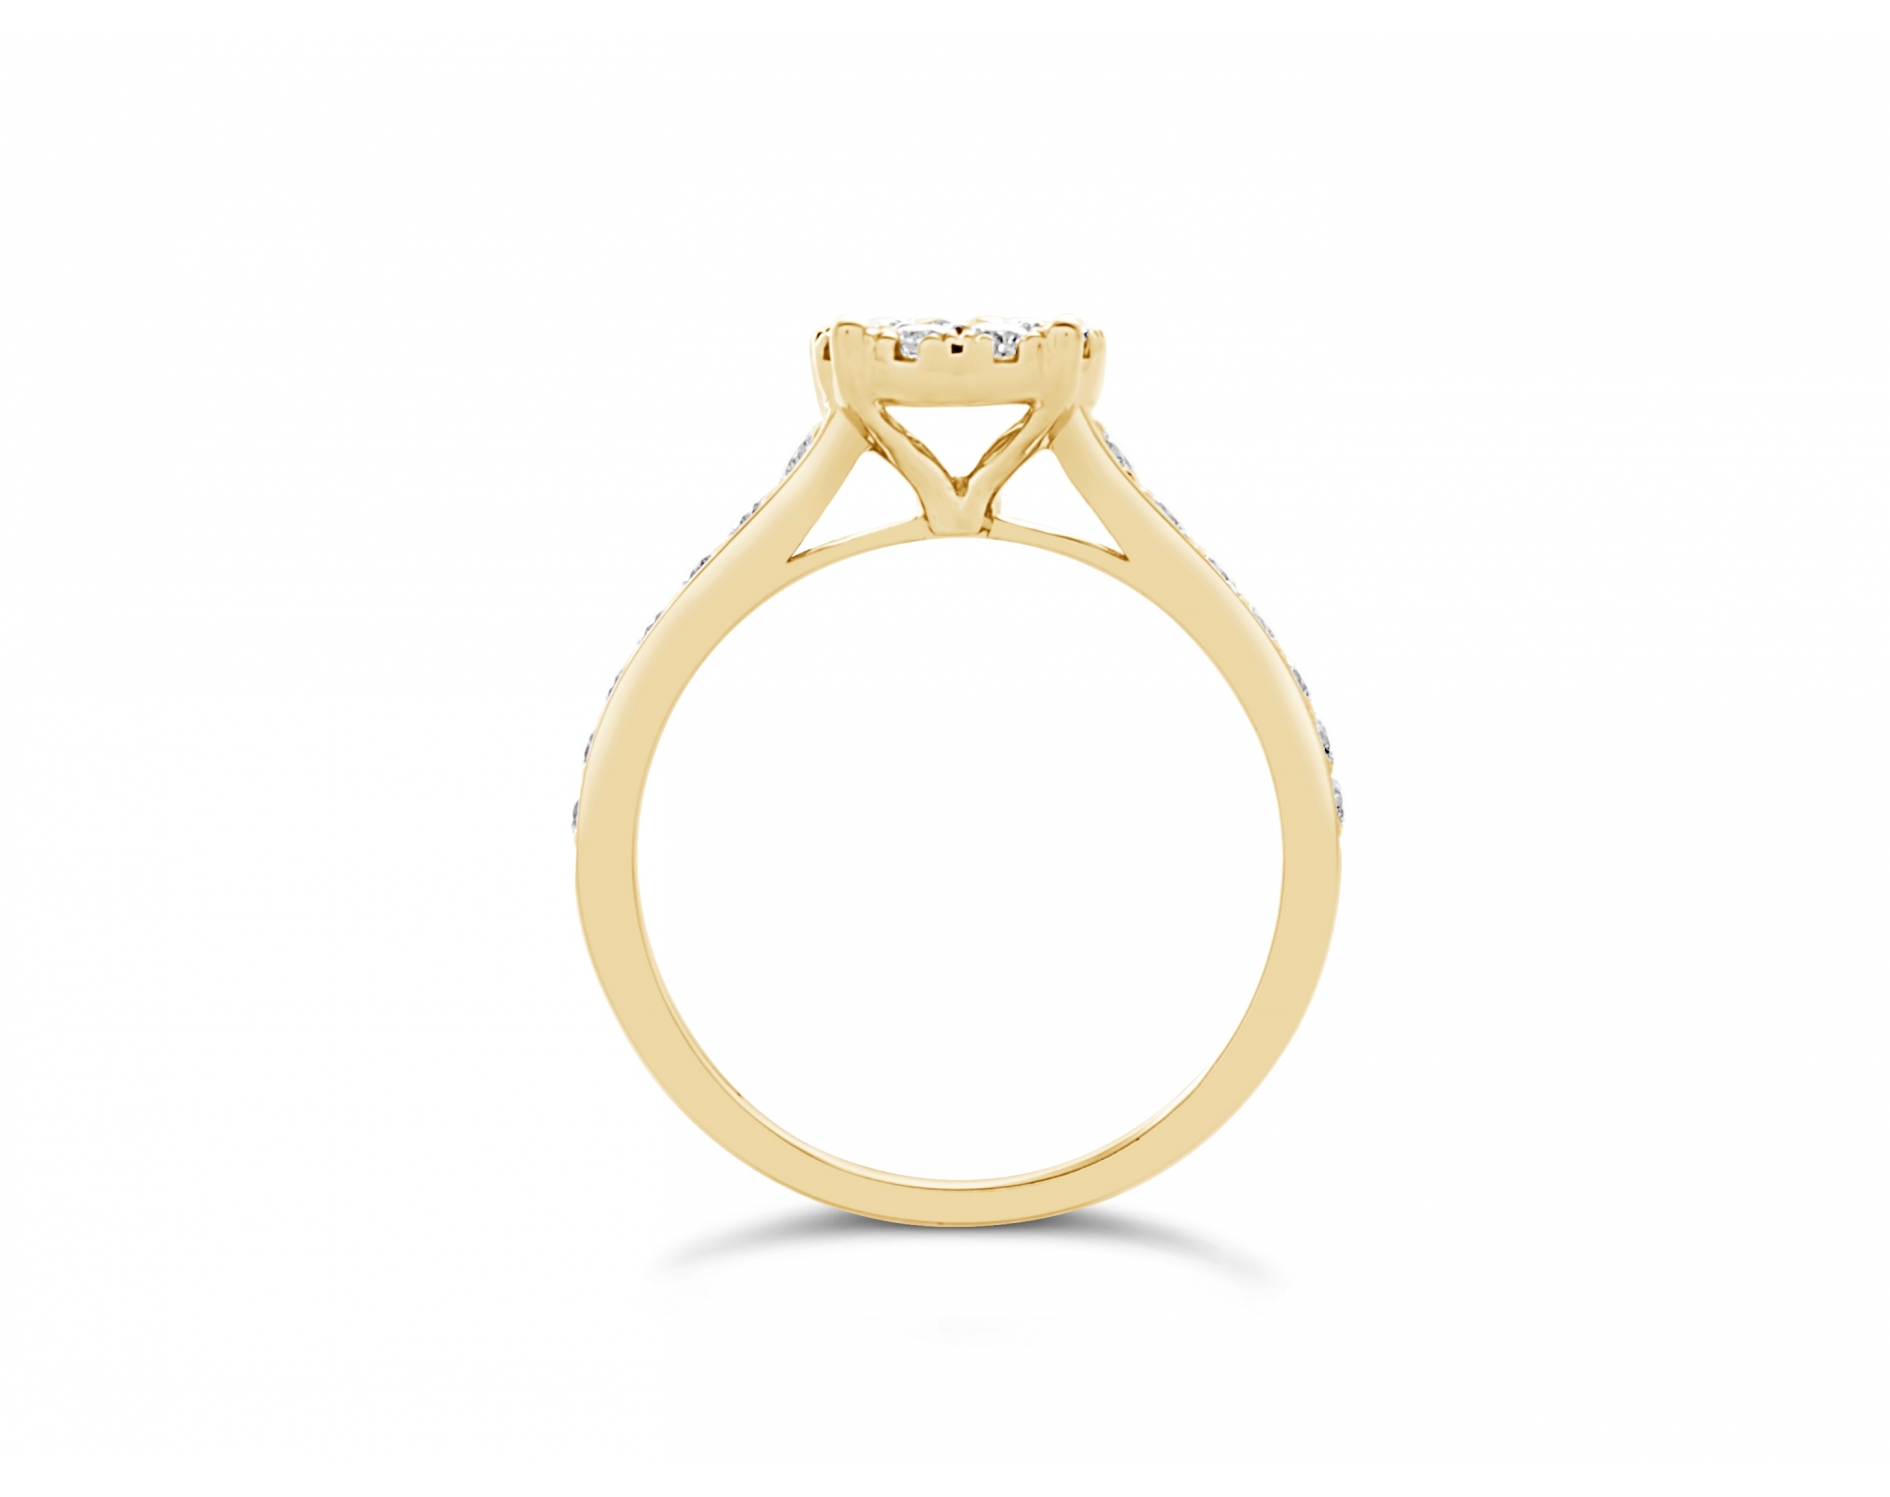 18k yellow gold halo illusion set engagement ring with round channel set diamonds Photos & images